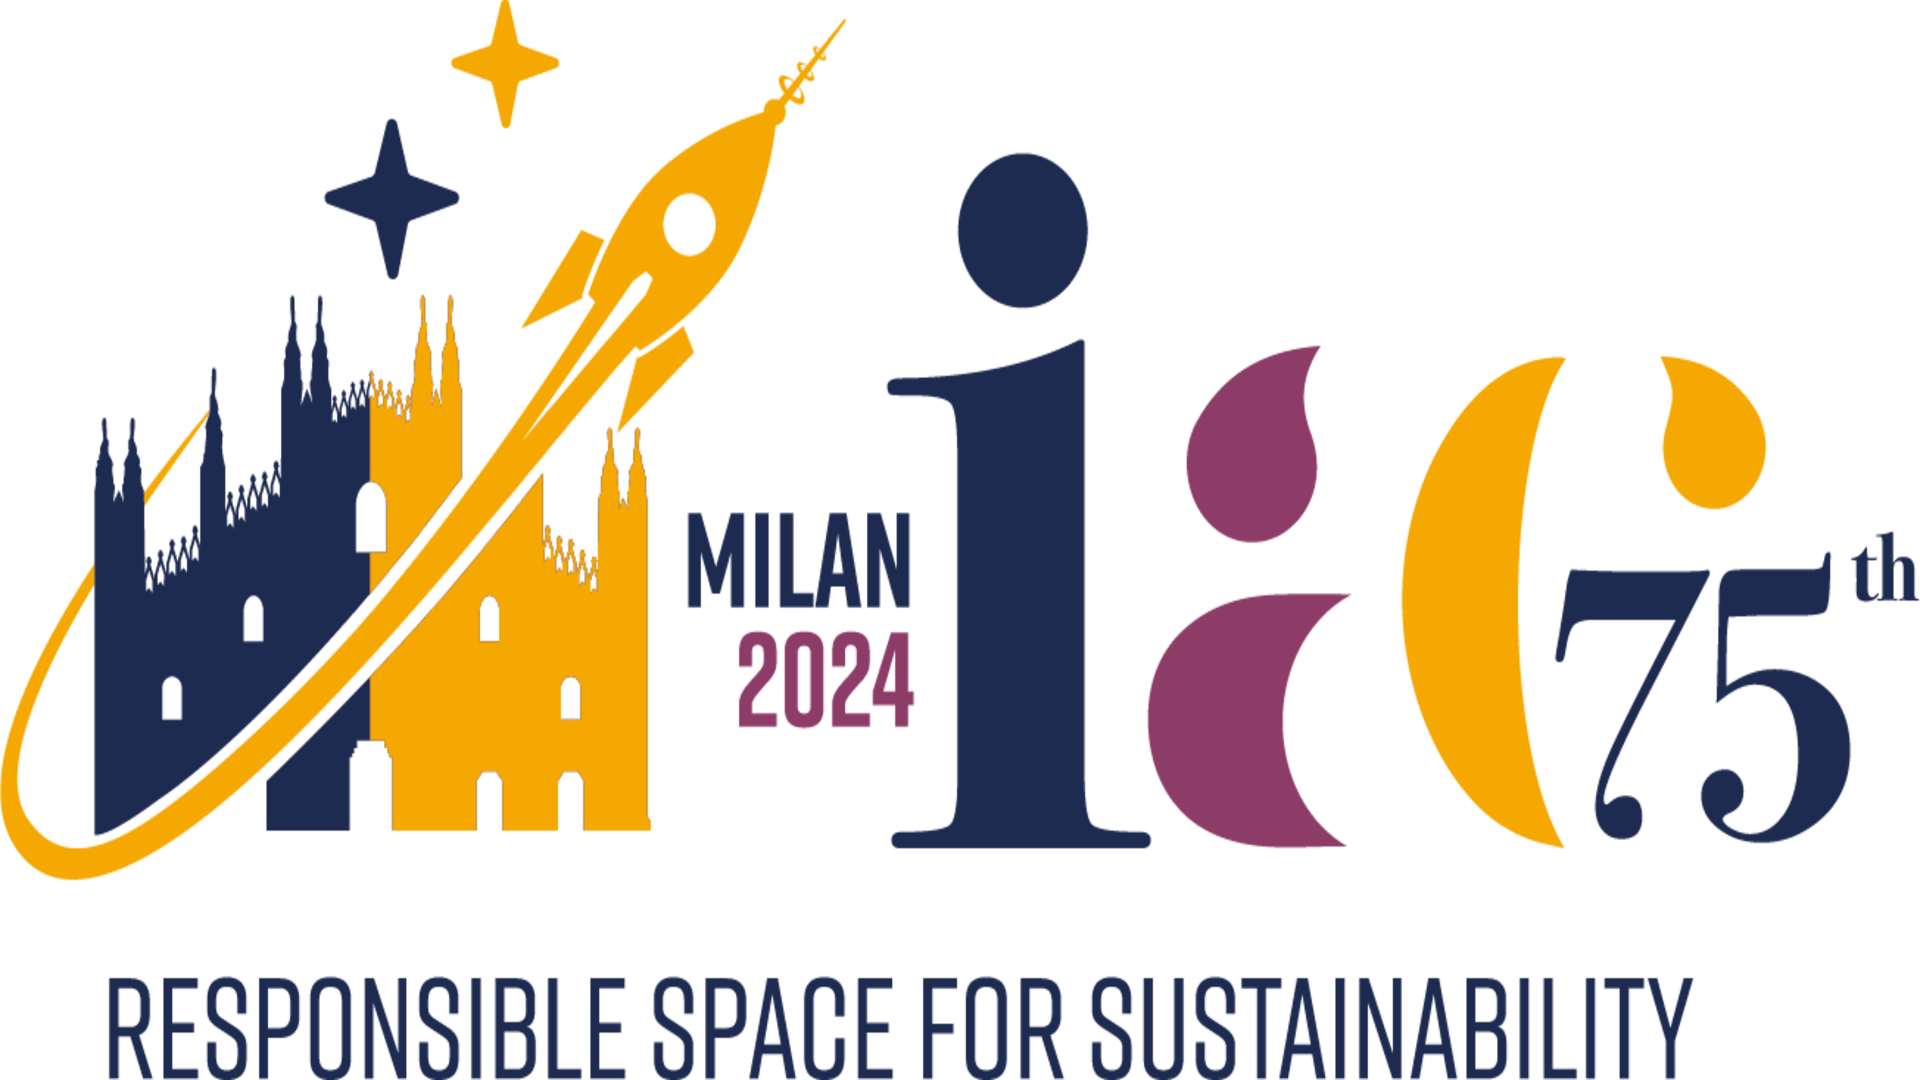 ASI - IAC 2024: THE SIGNING IN MILAN KICK-STARTS THE ORGANIZATION OF THE EVENT